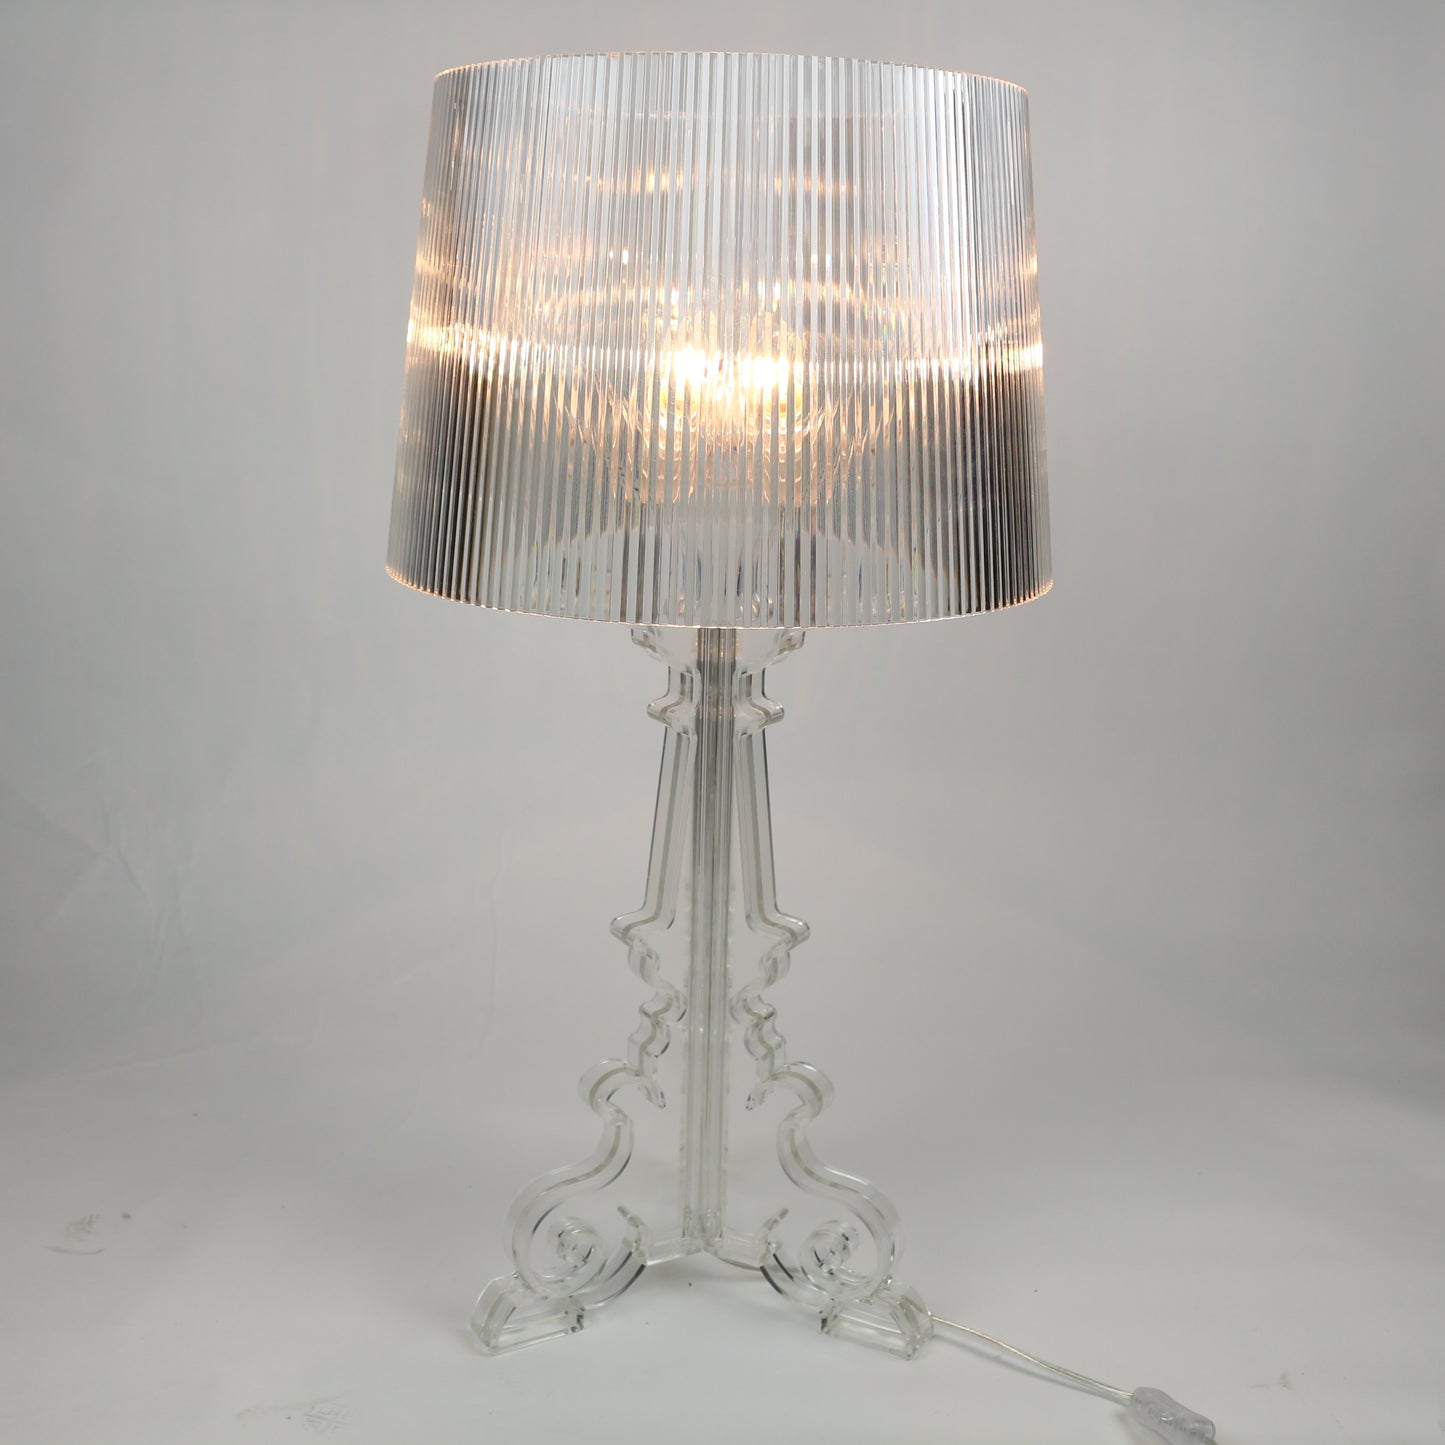 Bourgie Table Lamp bigger sizes available now